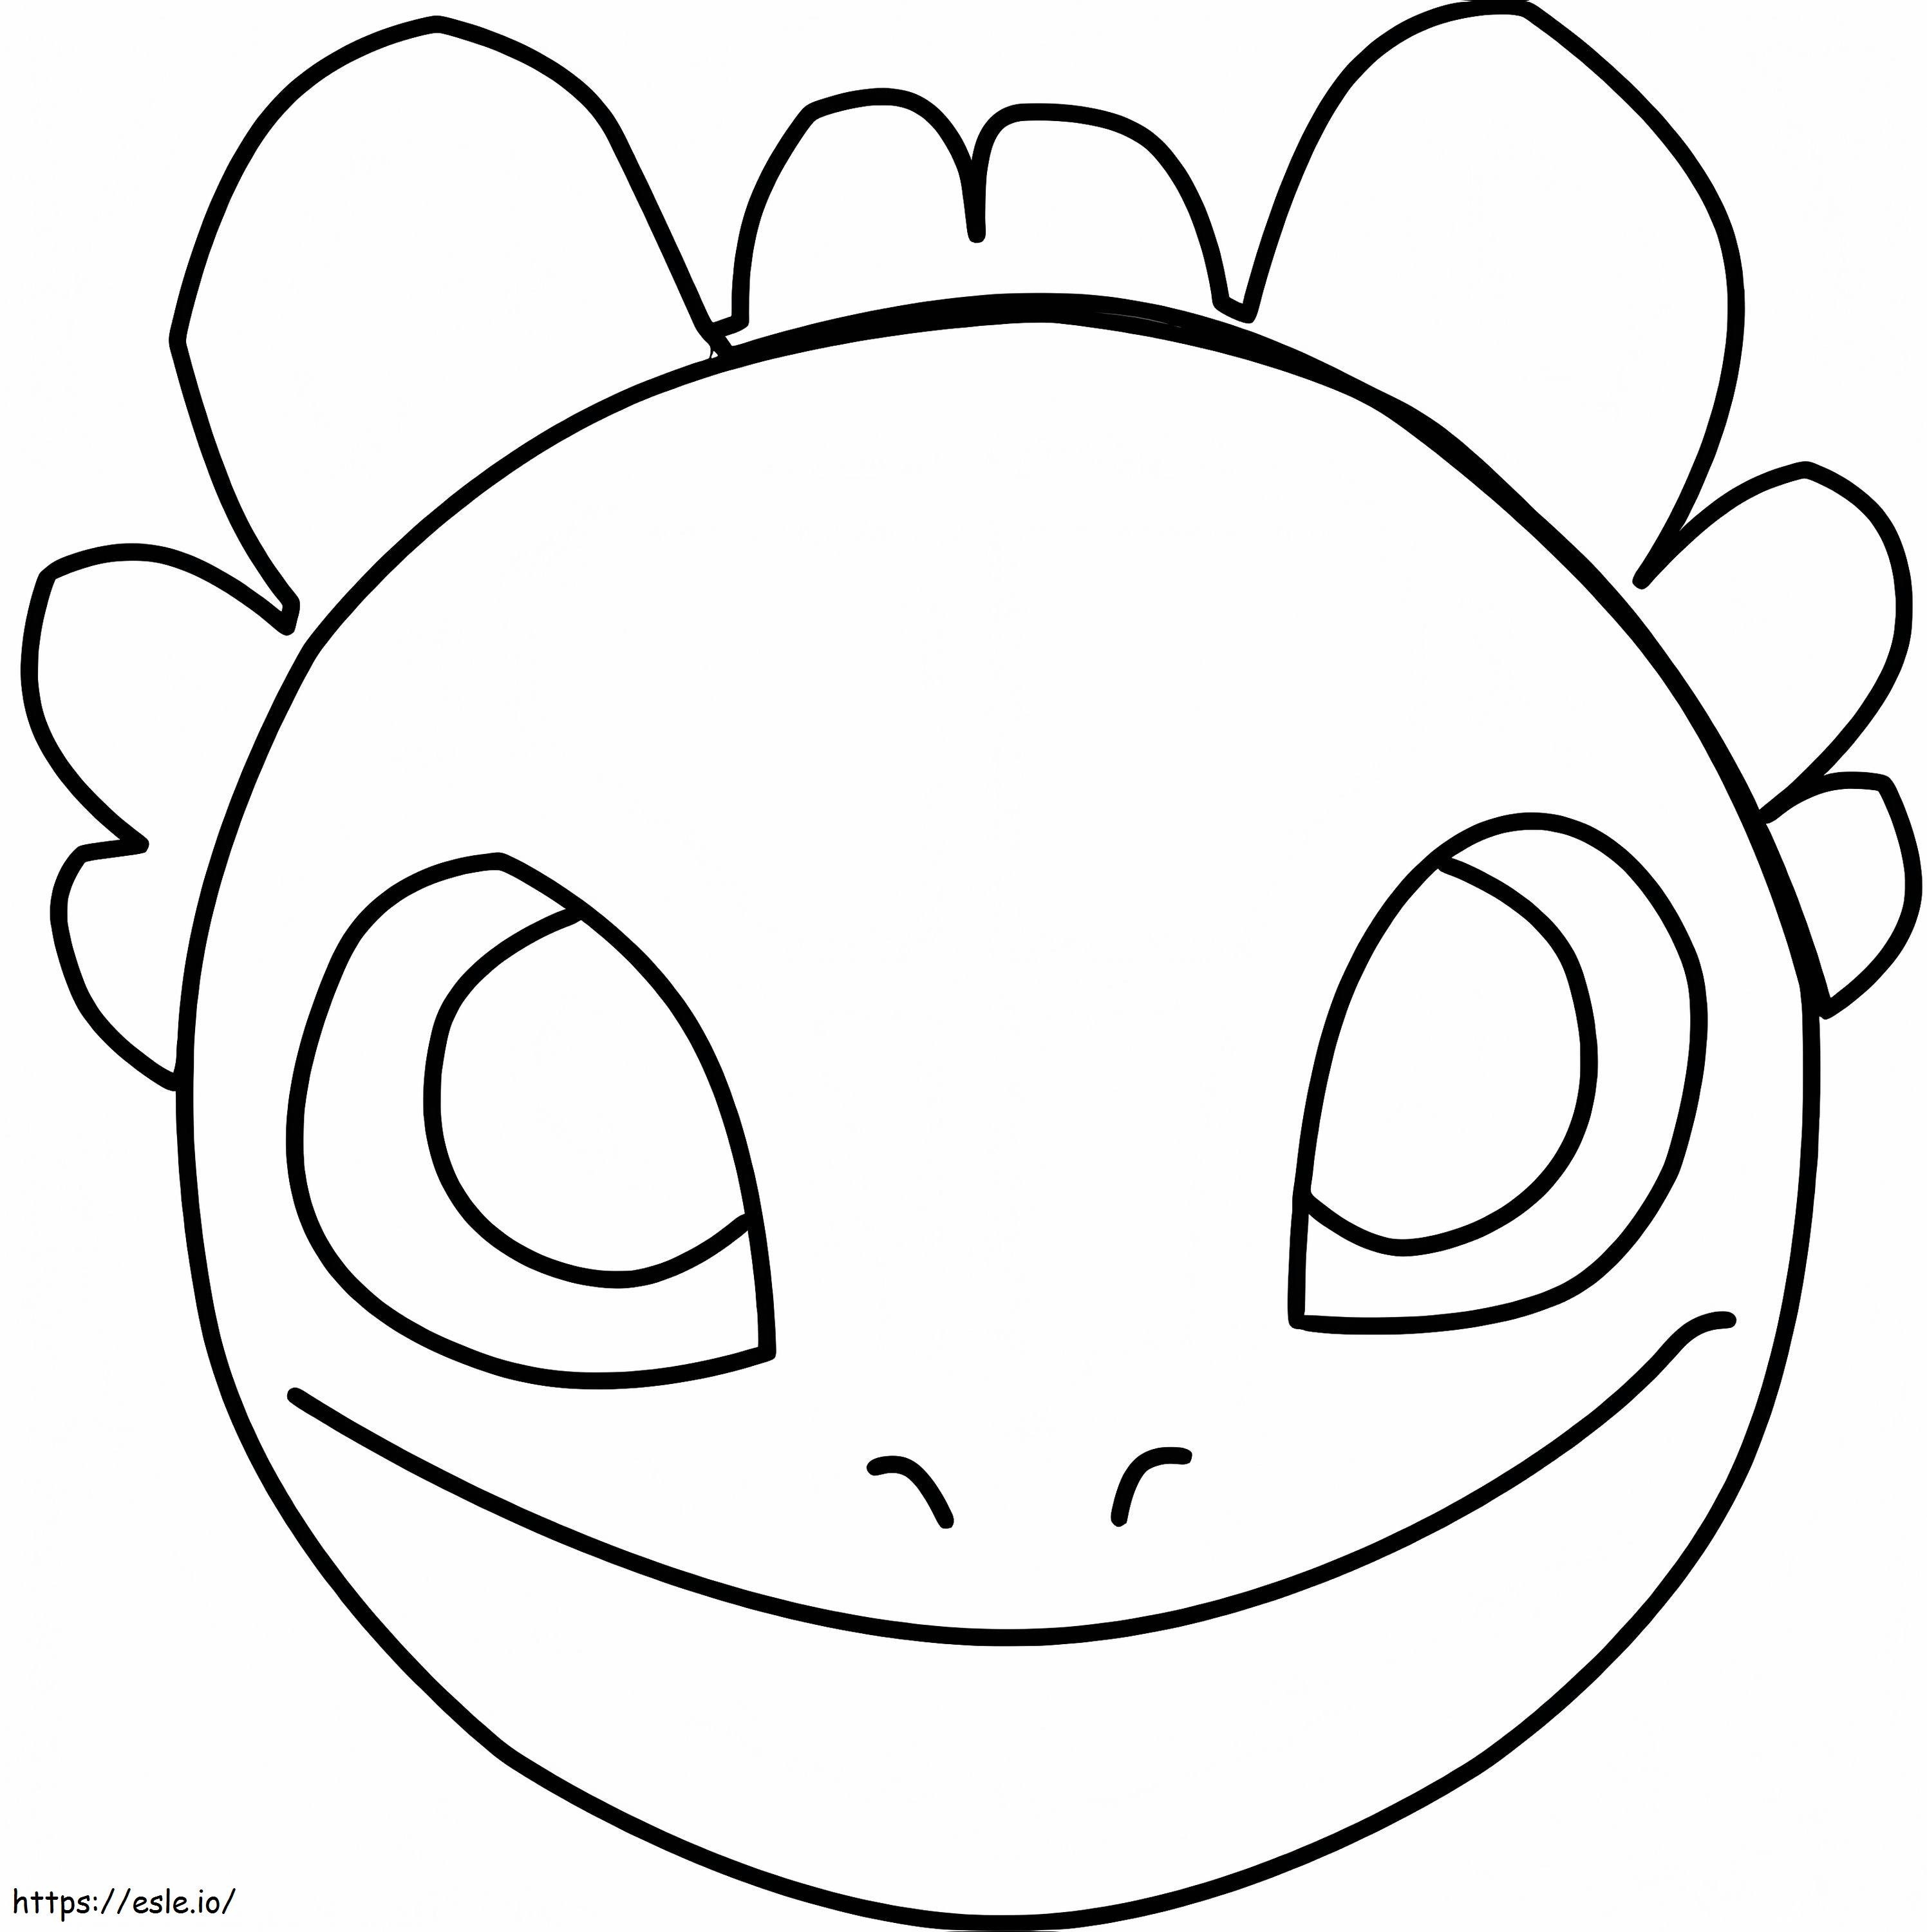 Toothless Mask coloring page